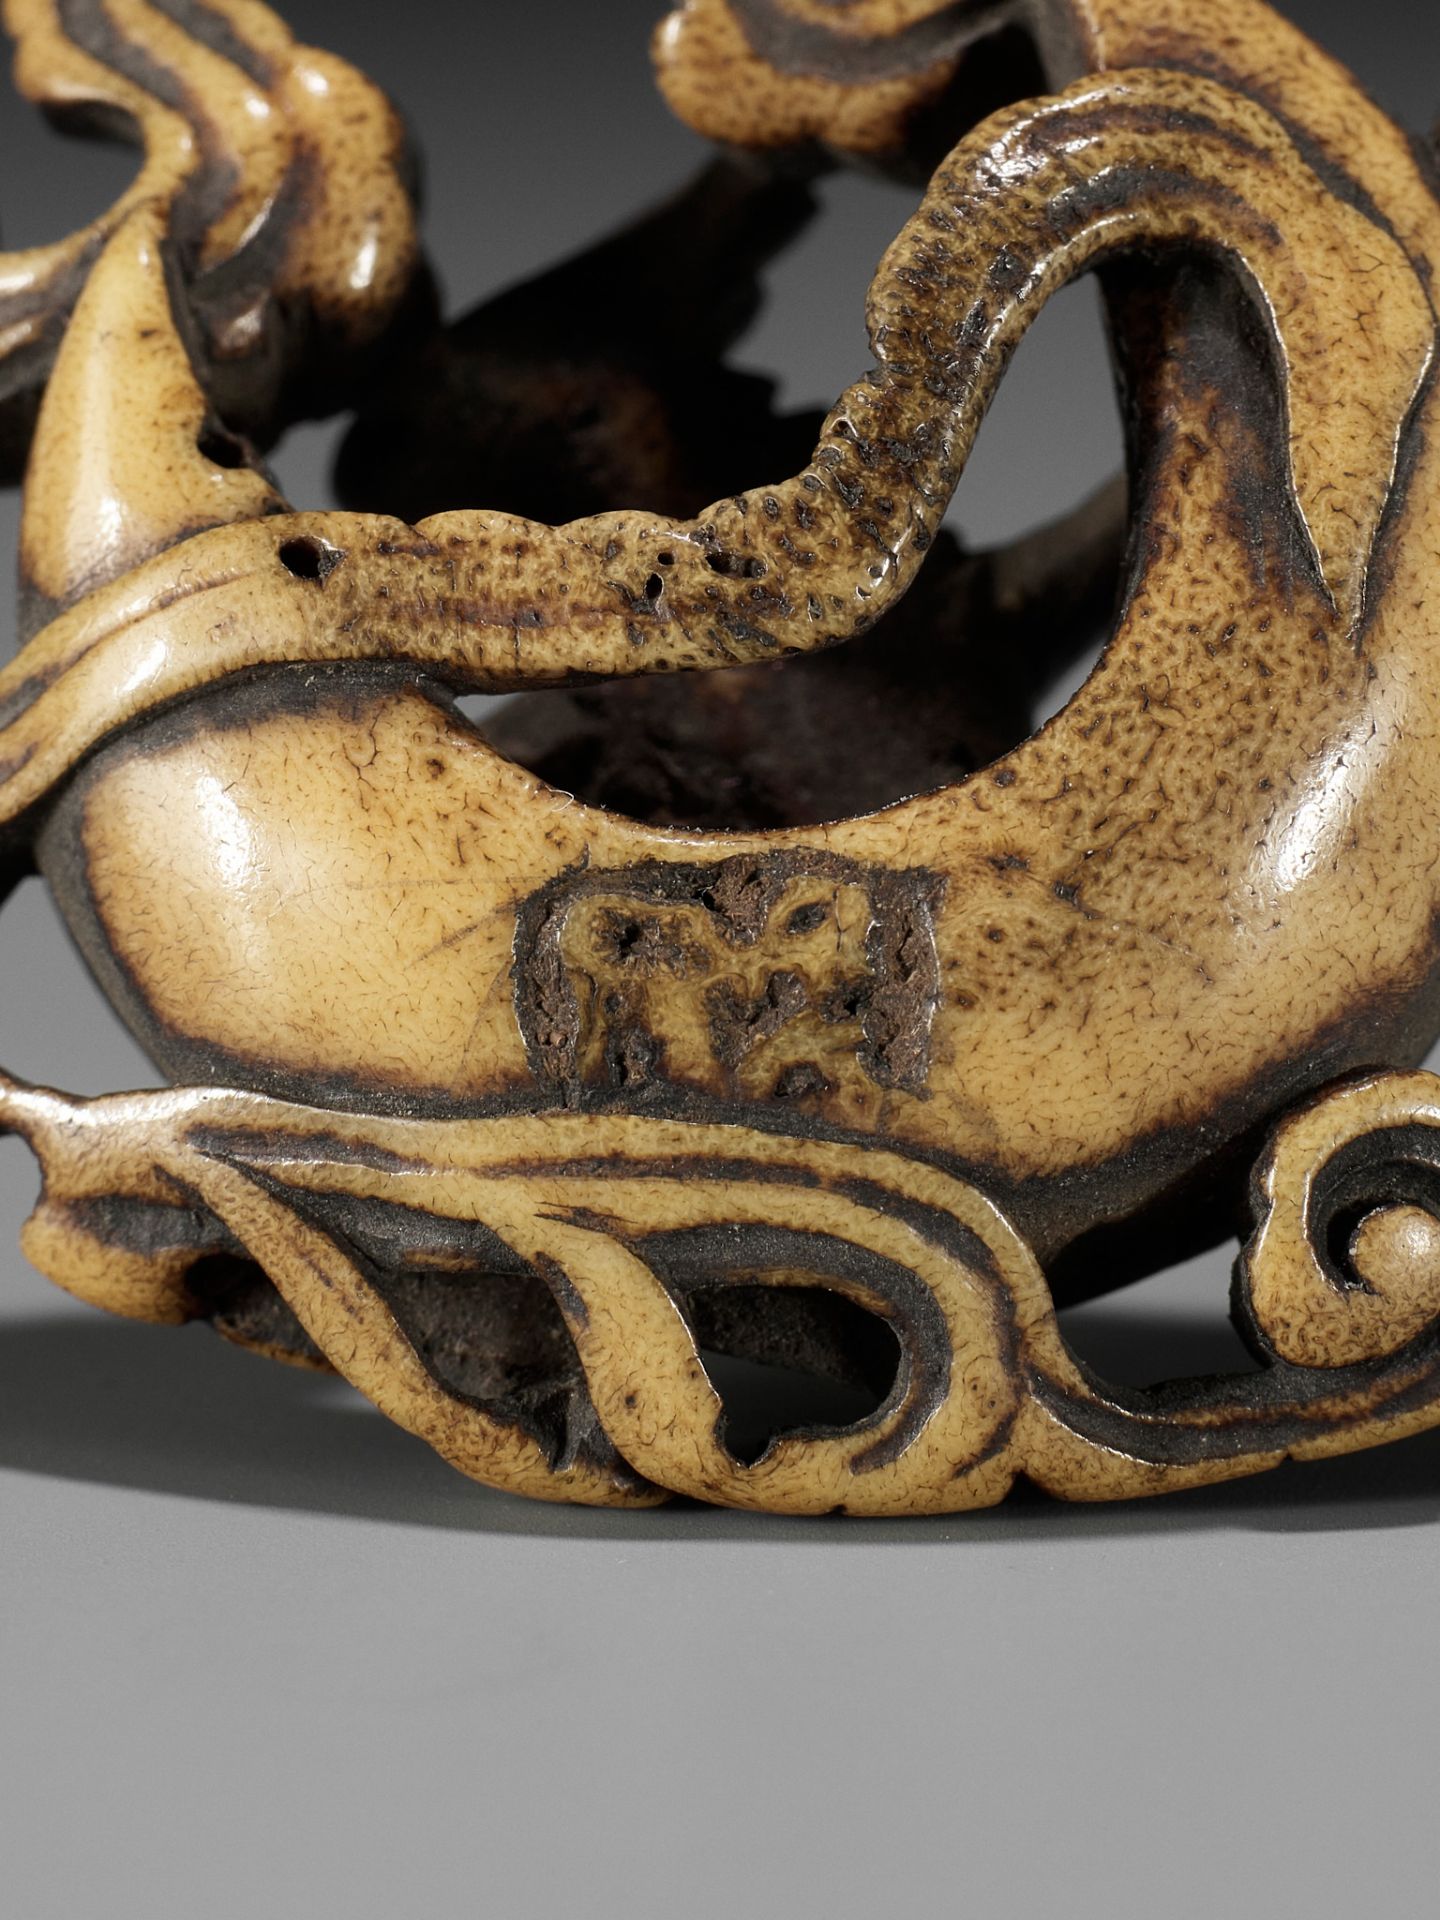 A FINE STAG ANTLER RYUSA MANJU NETSUKE OF A CUCKOO AND MOON, ATTRIBUTED TO RENSAI - Image 11 of 12